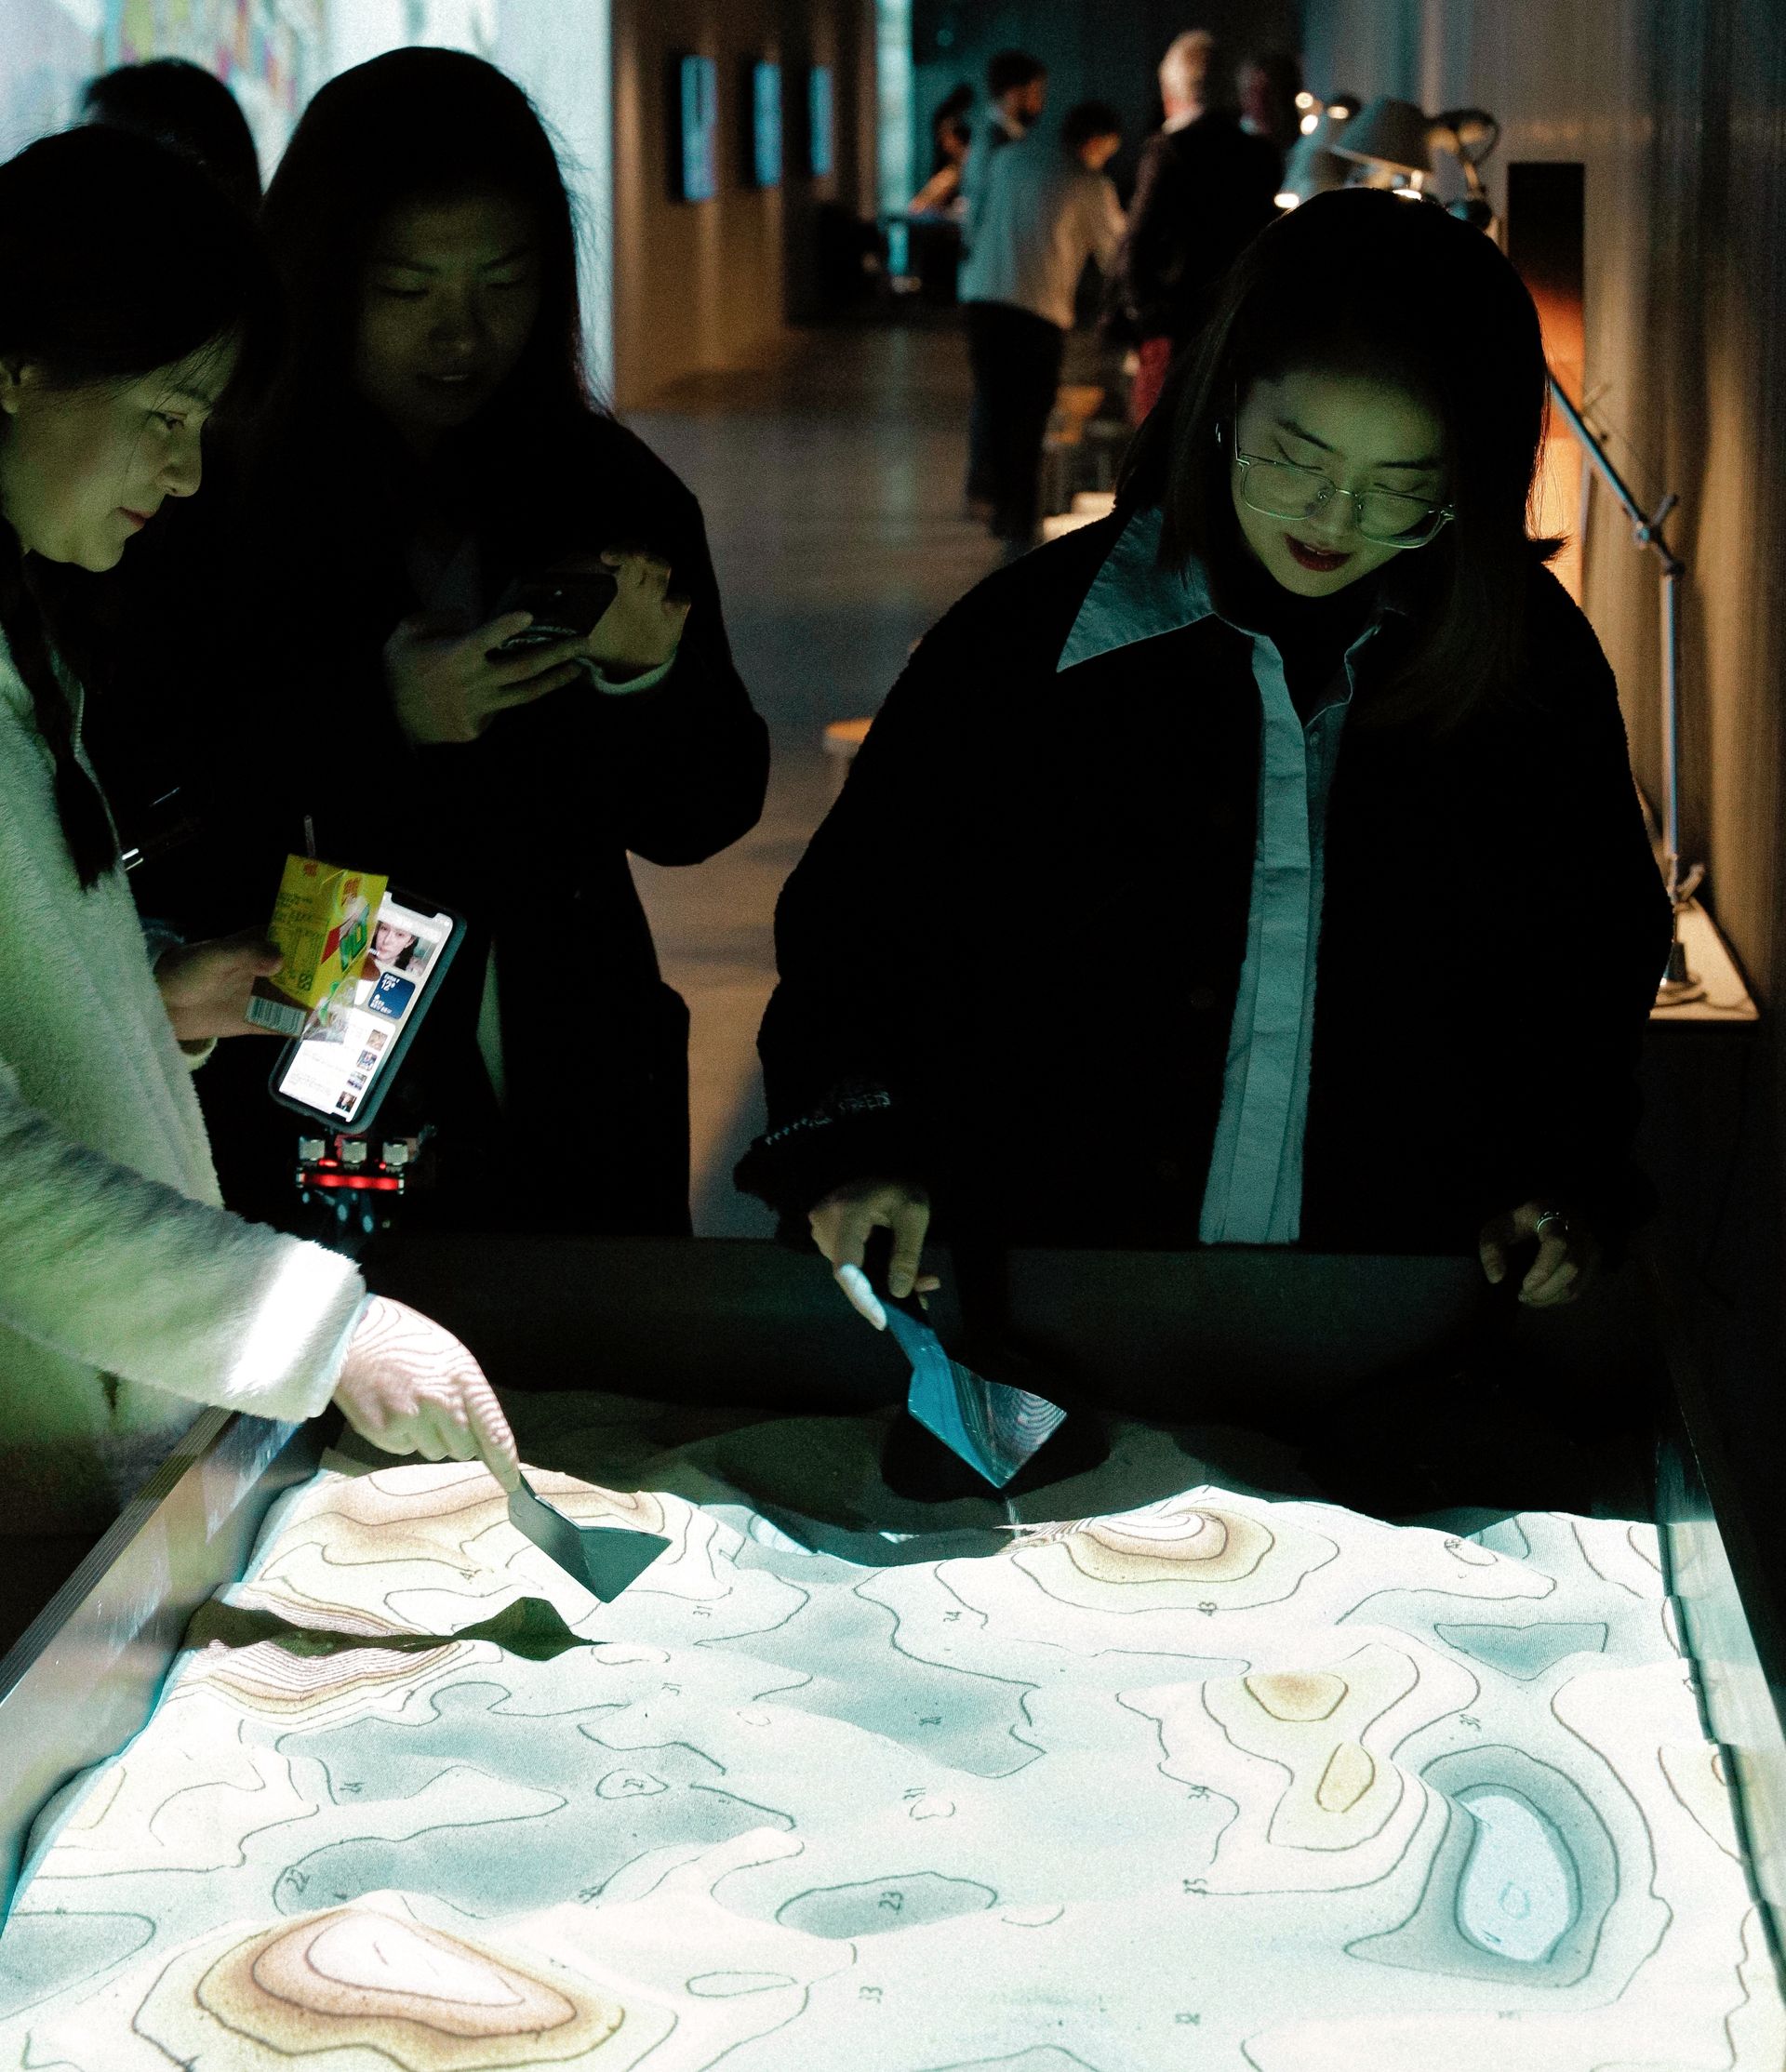 Two people use small sculptural tools to shape sand contained in a box with an overhead projection displaying contour lines and elevations.